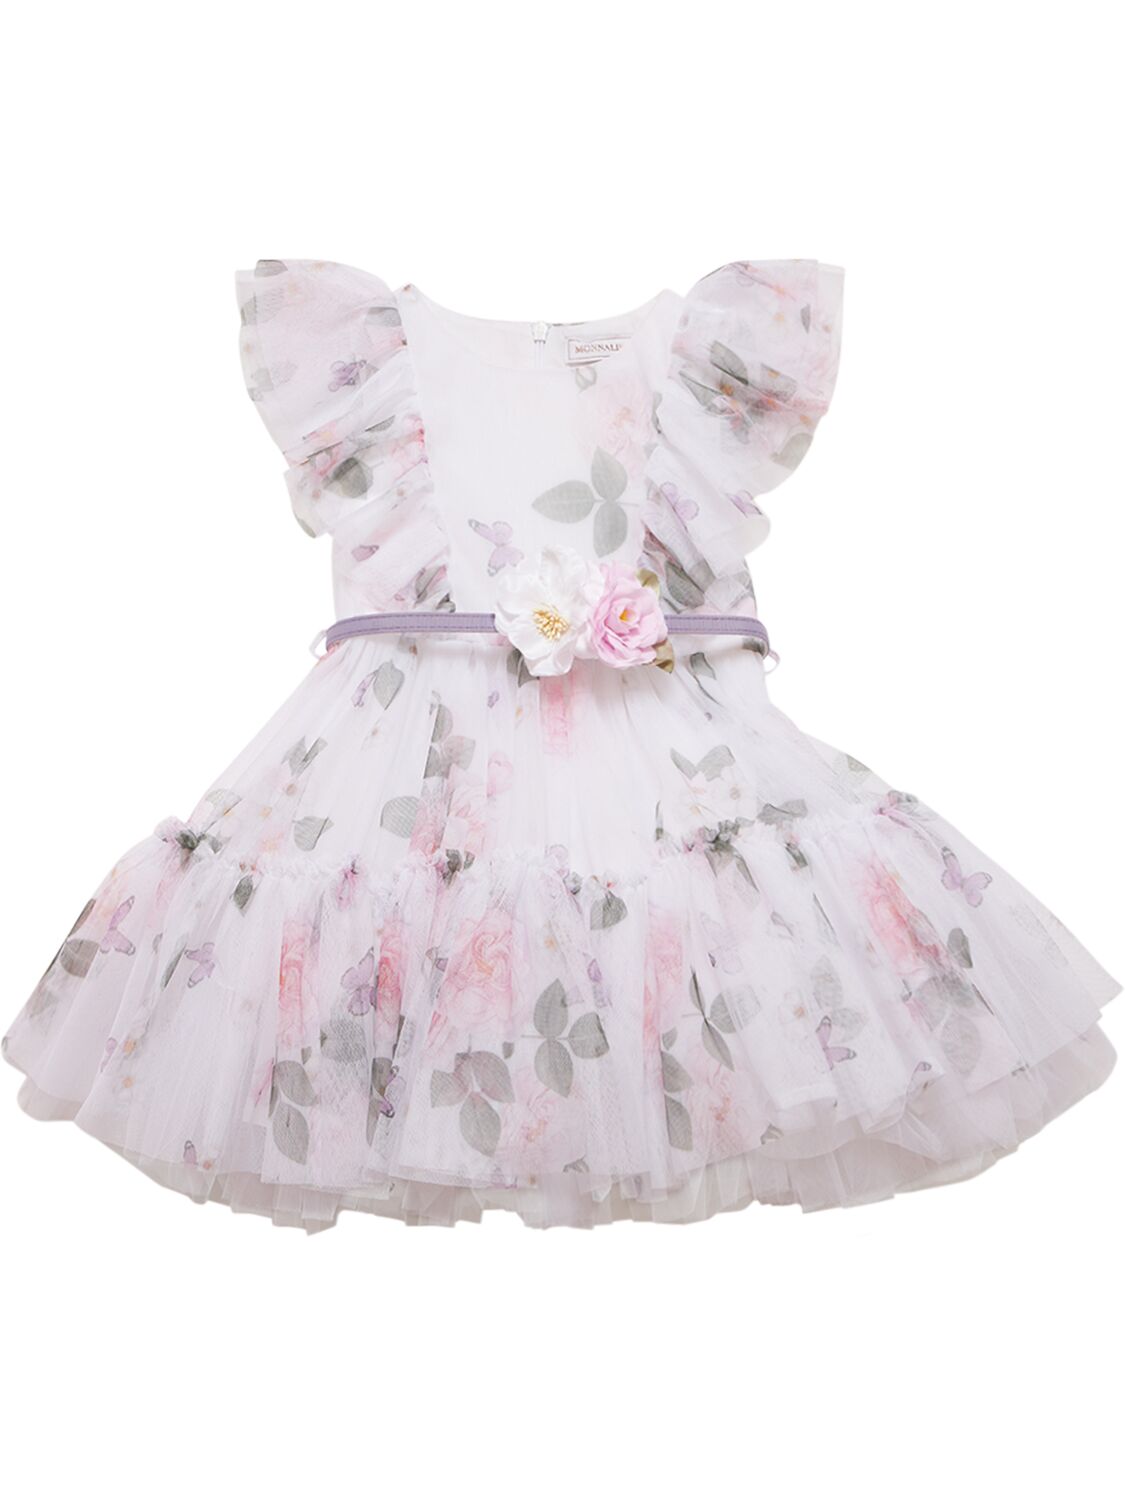 Image of Printed Stretch Tulle Dress W/ Ruffles